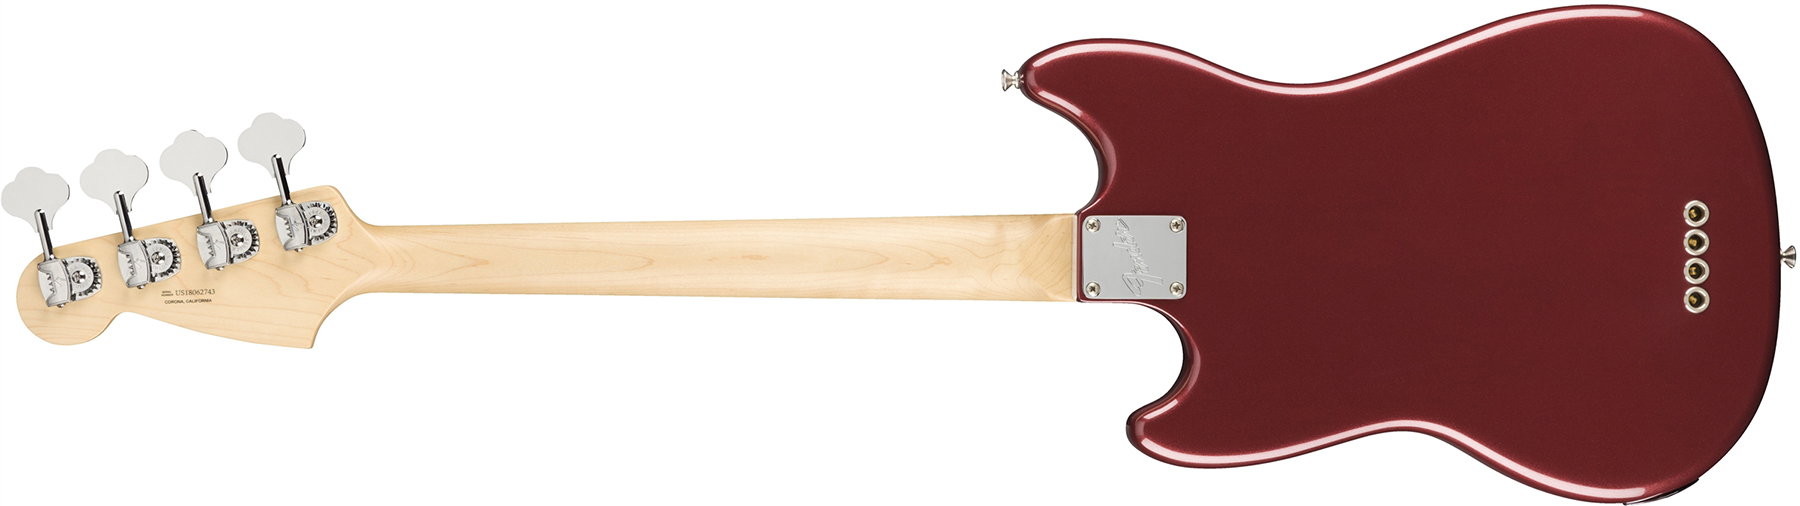 Fender Mustang Bass American Performer Usa Rw - Aubergine - Electric bass for kids - Variation 1